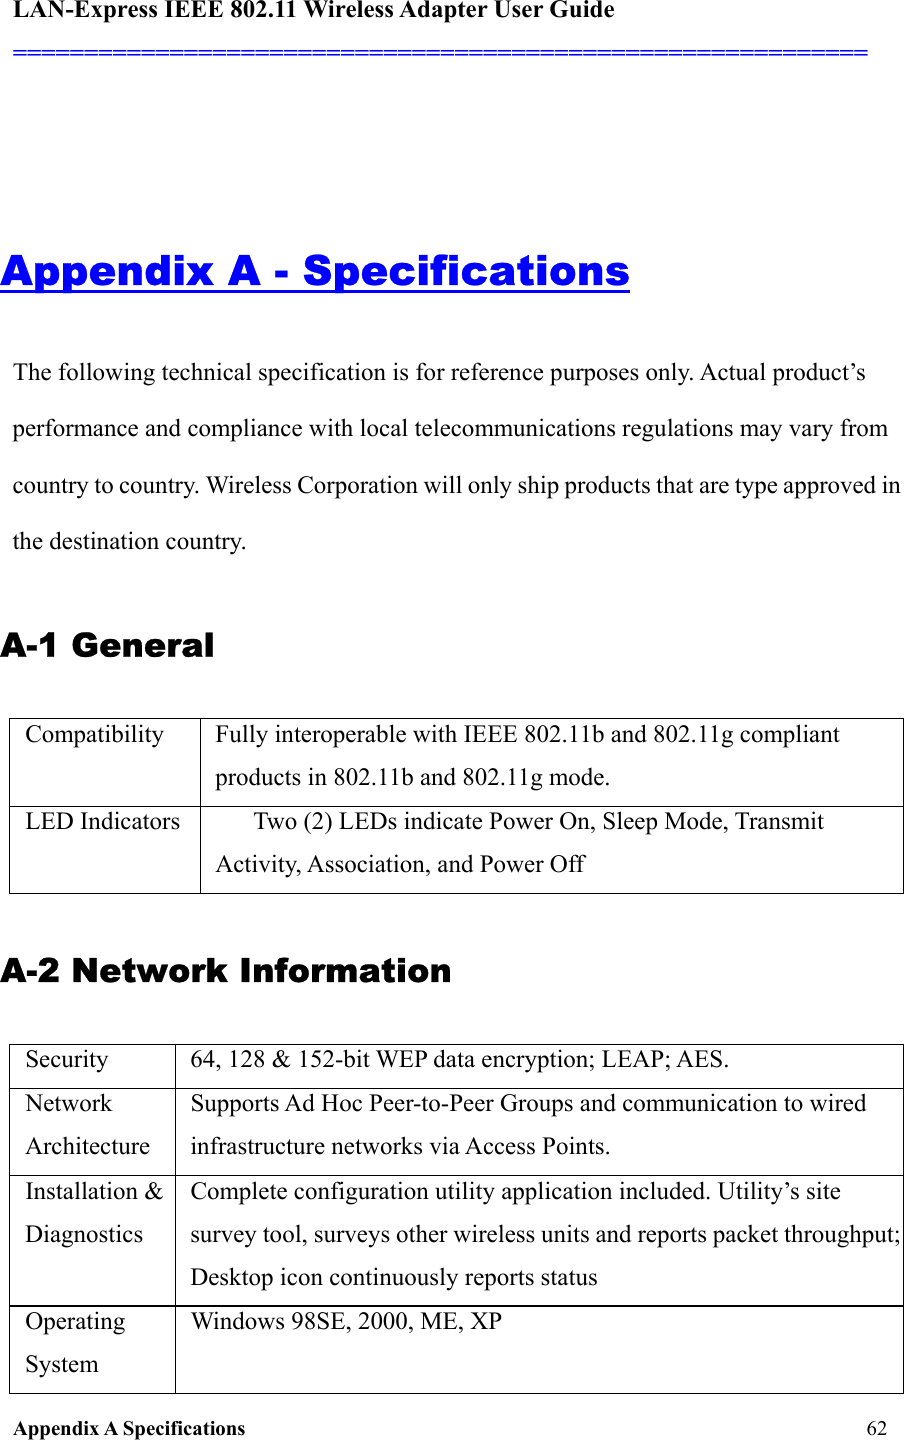 LAN-Express IEEE 802.11 Wireless Adapter User Guide ============================================================  Appendix A Specifications   62  Appendix A - Specifications The following technical specification is for reference purposes only. Actual product’s performance and compliance with local telecommunications regulations may vary from country to country. Wireless Corporation will only ship products that are type approved in the destination country. A-1 General Compatibility  Fully interoperable with IEEE 802.11b and 802.11g compliant products in 802.11b and 802.11g mode. LED Indicators   Two (2) LEDs indicate Power On, Sleep Mode, Transmit Activity, Association, and Power Off A-2 Network Information Security  64, 128 &amp; 152-bit WEP data encryption; LEAP; AES. Network Architecture Supports Ad Hoc Peer-to-Peer Groups and communication to wired infrastructure networks via Access Points. Installation &amp; Diagnostics Complete configuration utility application included. Utility’s site survey tool, surveys other wireless units and reports packet throughput; Desktop icon continuously reports status Operating System Windows 98SE, 2000, ME, XP 